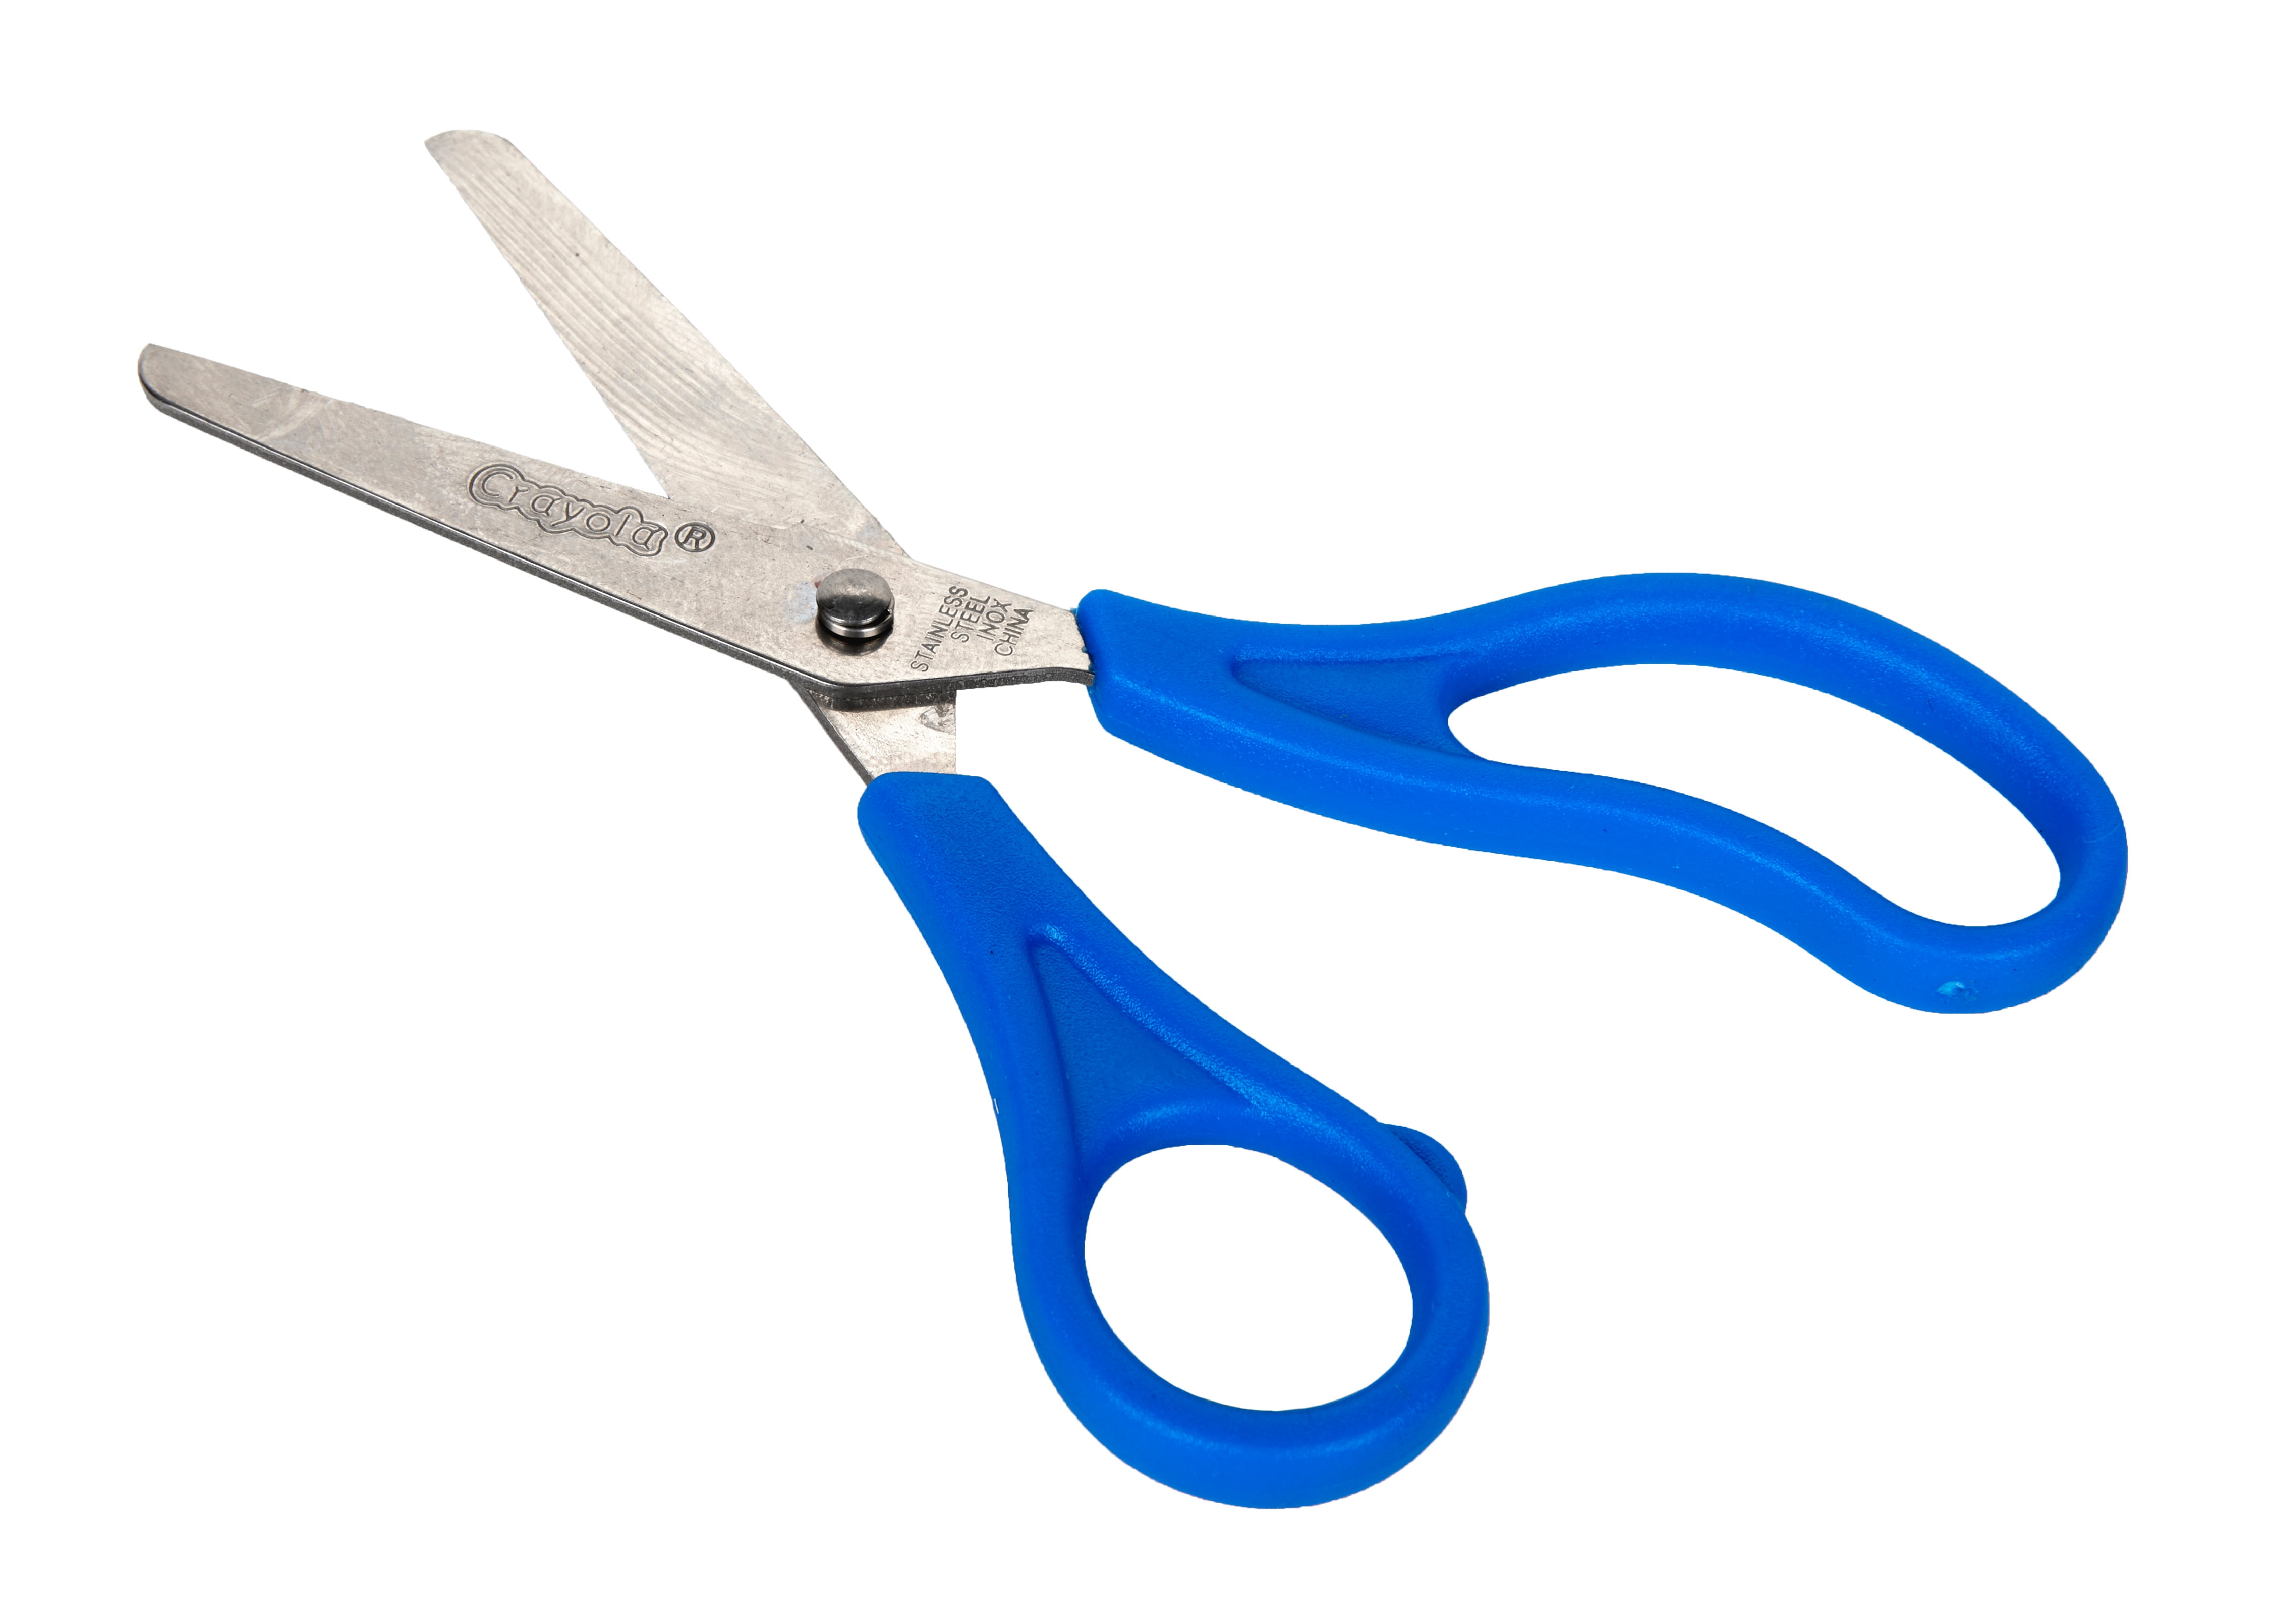 Crayola Kids Blue Blunt Tip Scissors, Ages 4 and Up 